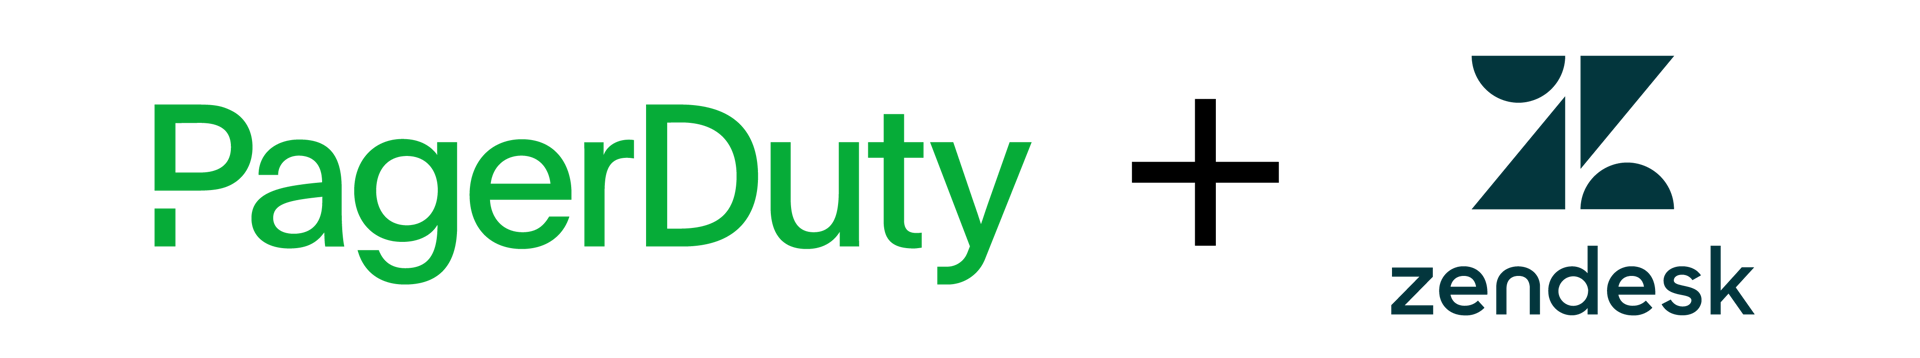 What's New in PagerDuty and PagerDuty Product Updates : PagerDuty + Zendesk